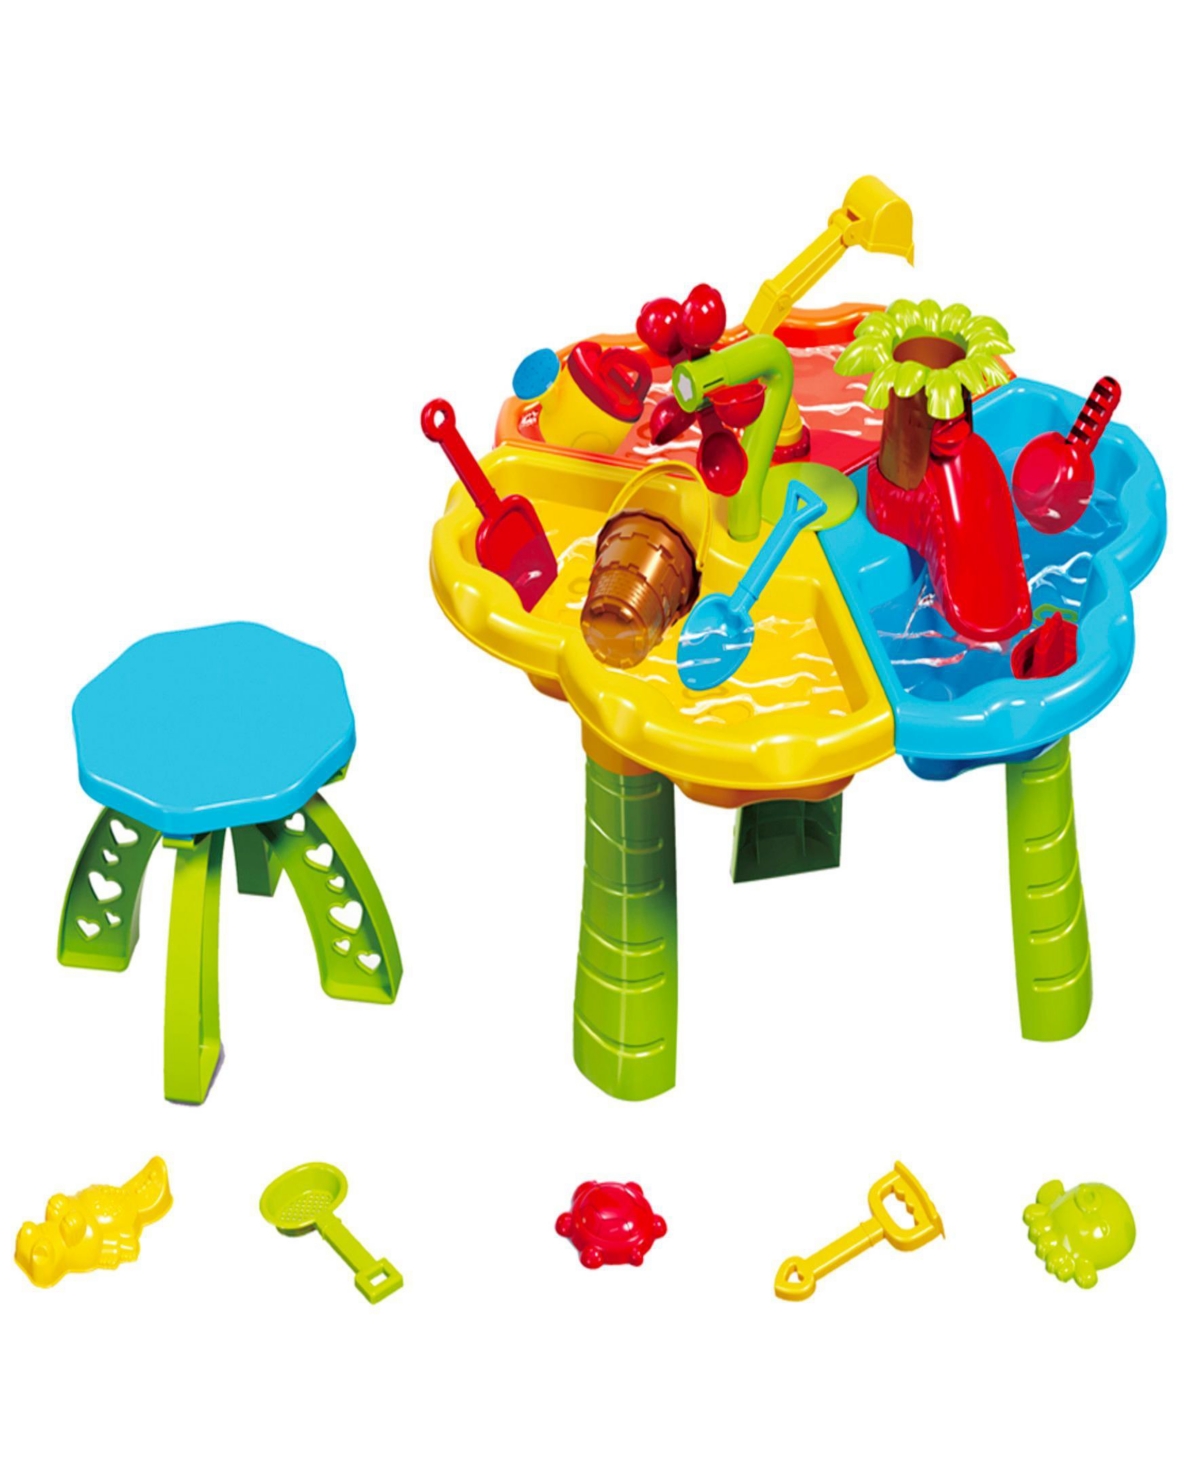 Trimate Babies' - Sensory Sand And Water Table With Chair In Multi